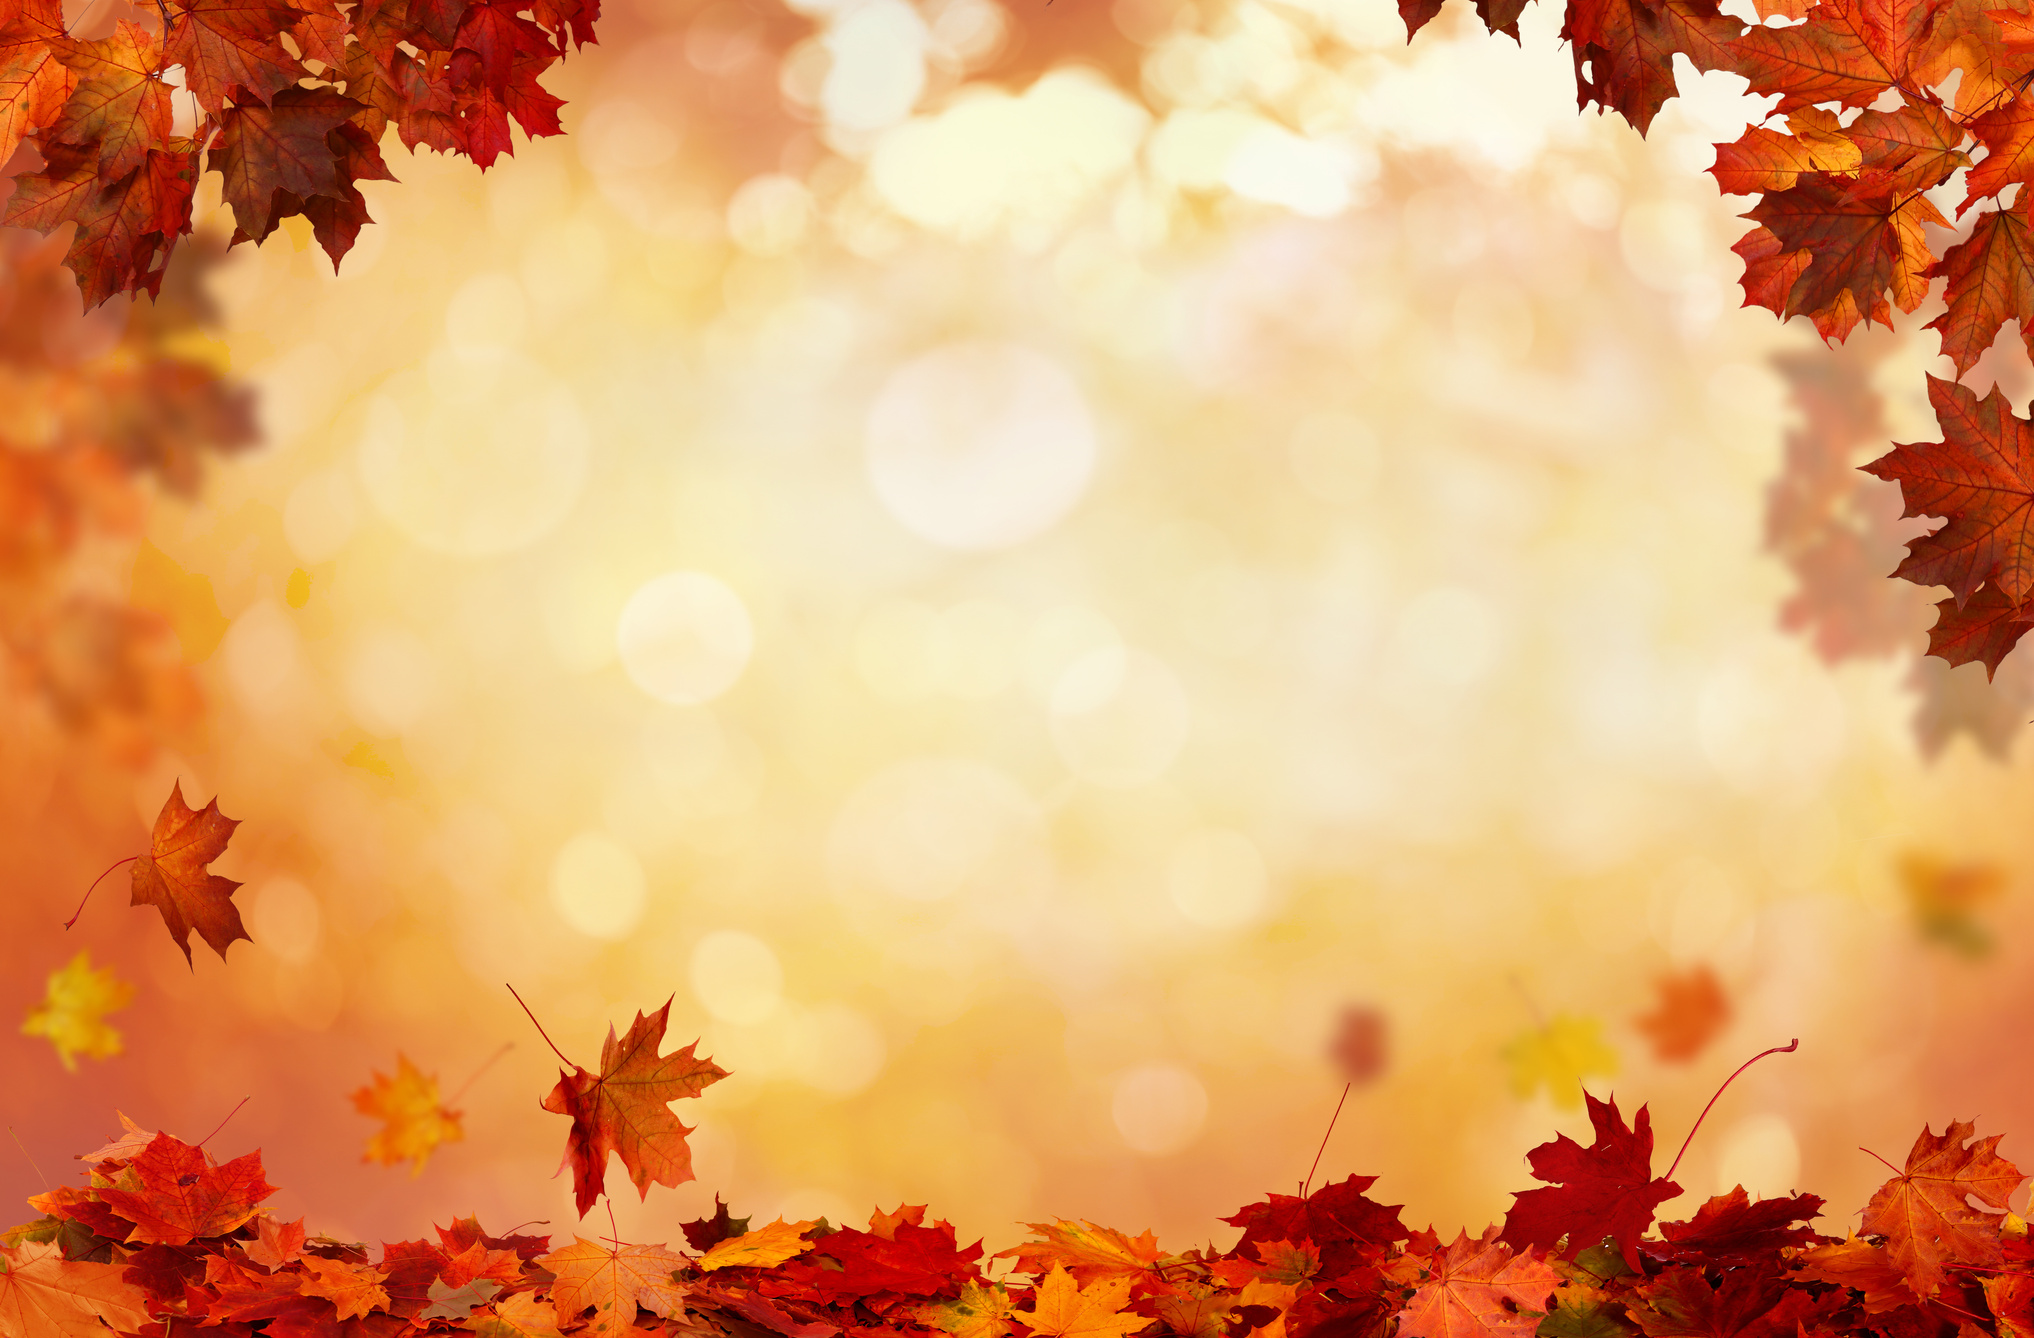 Autumn maple leaves .Falling leaves natural background.